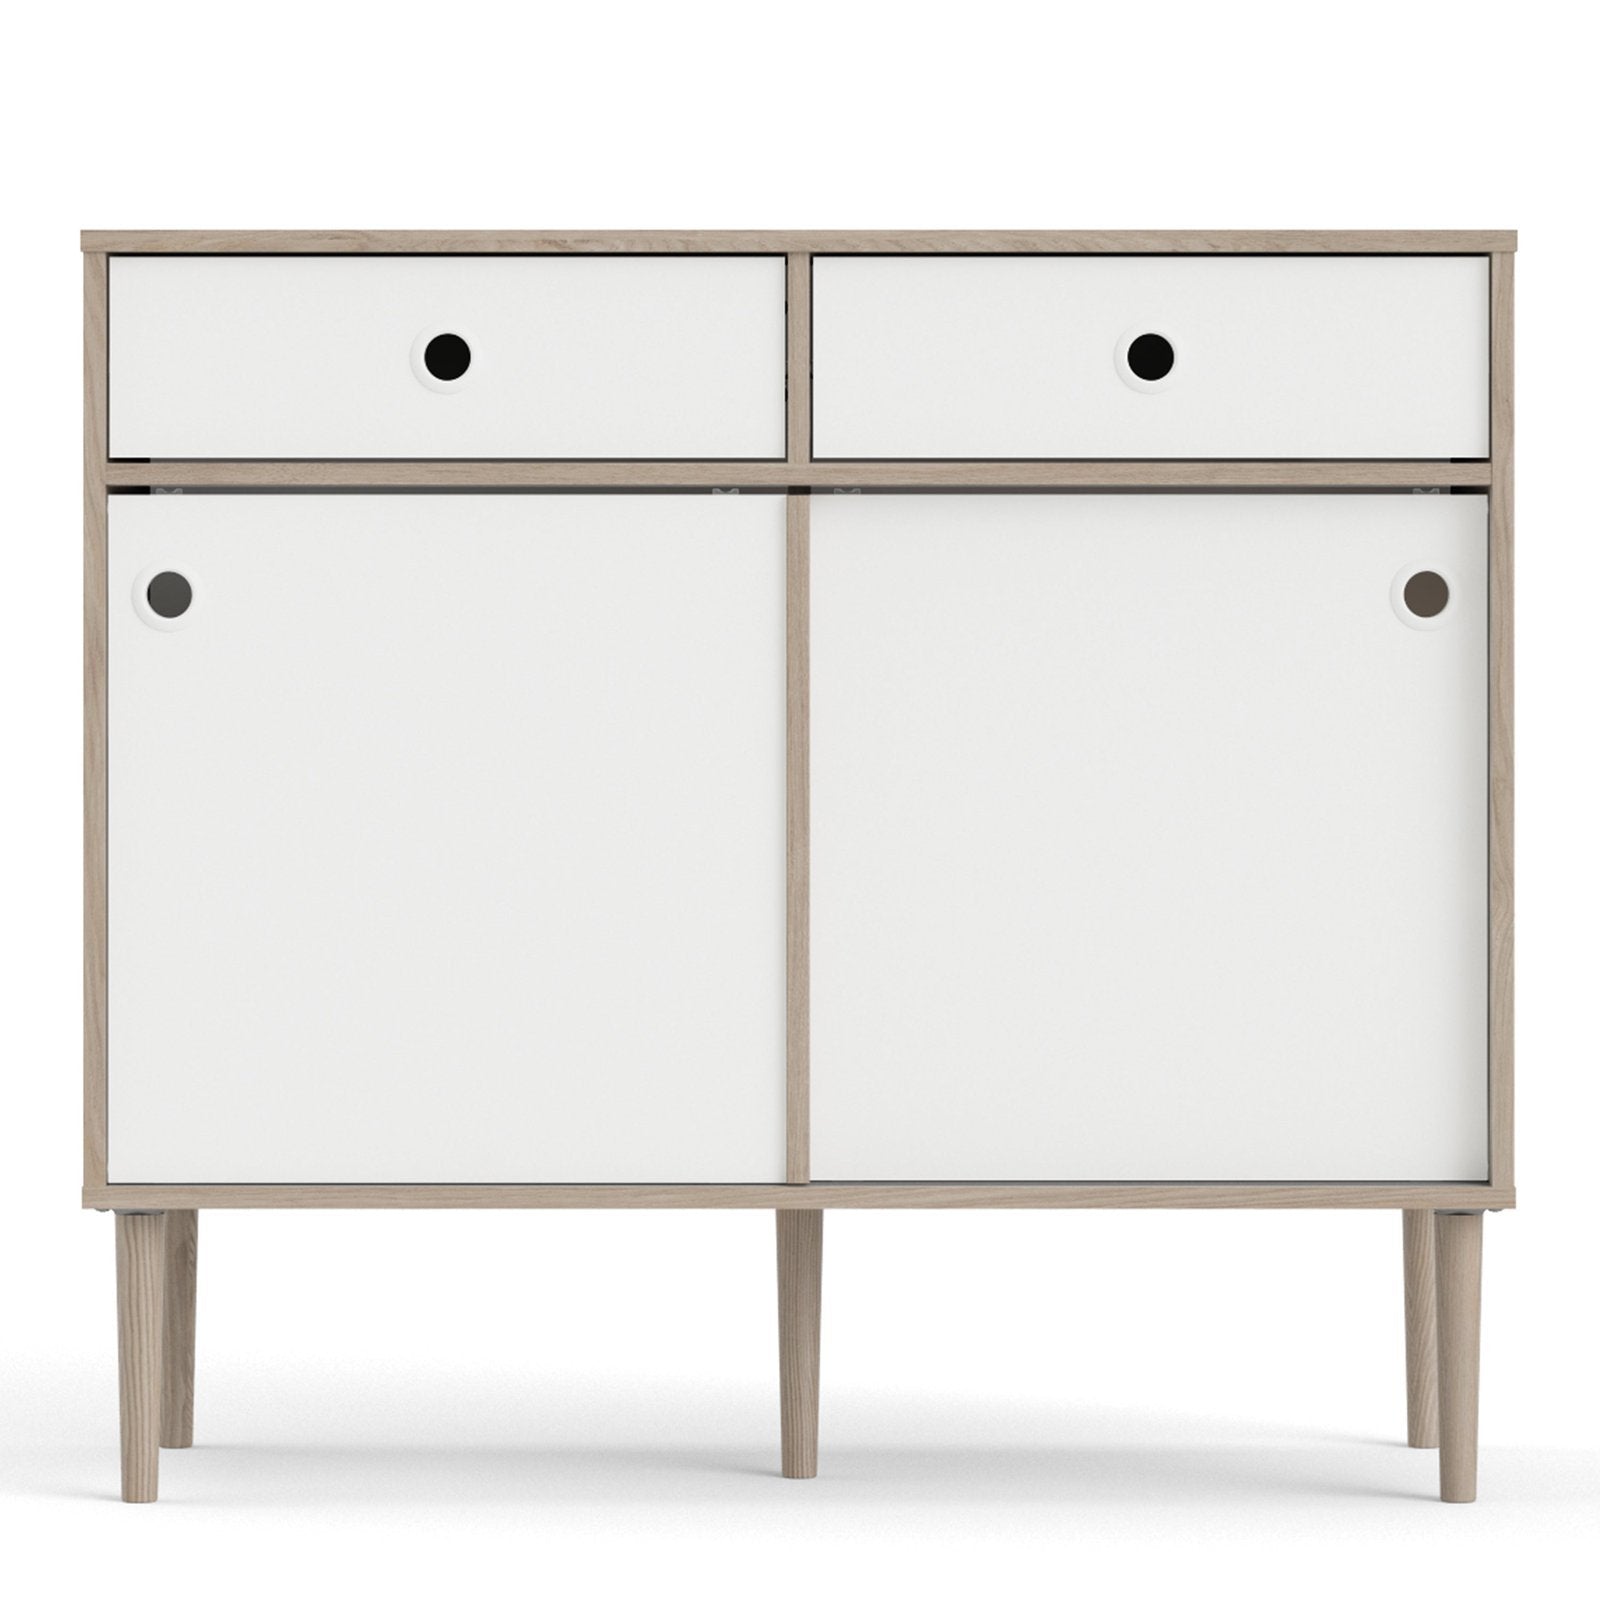 Rome 2 Drawer Sideboard with 2 Sliding Doors in Jackson Hickory Oak